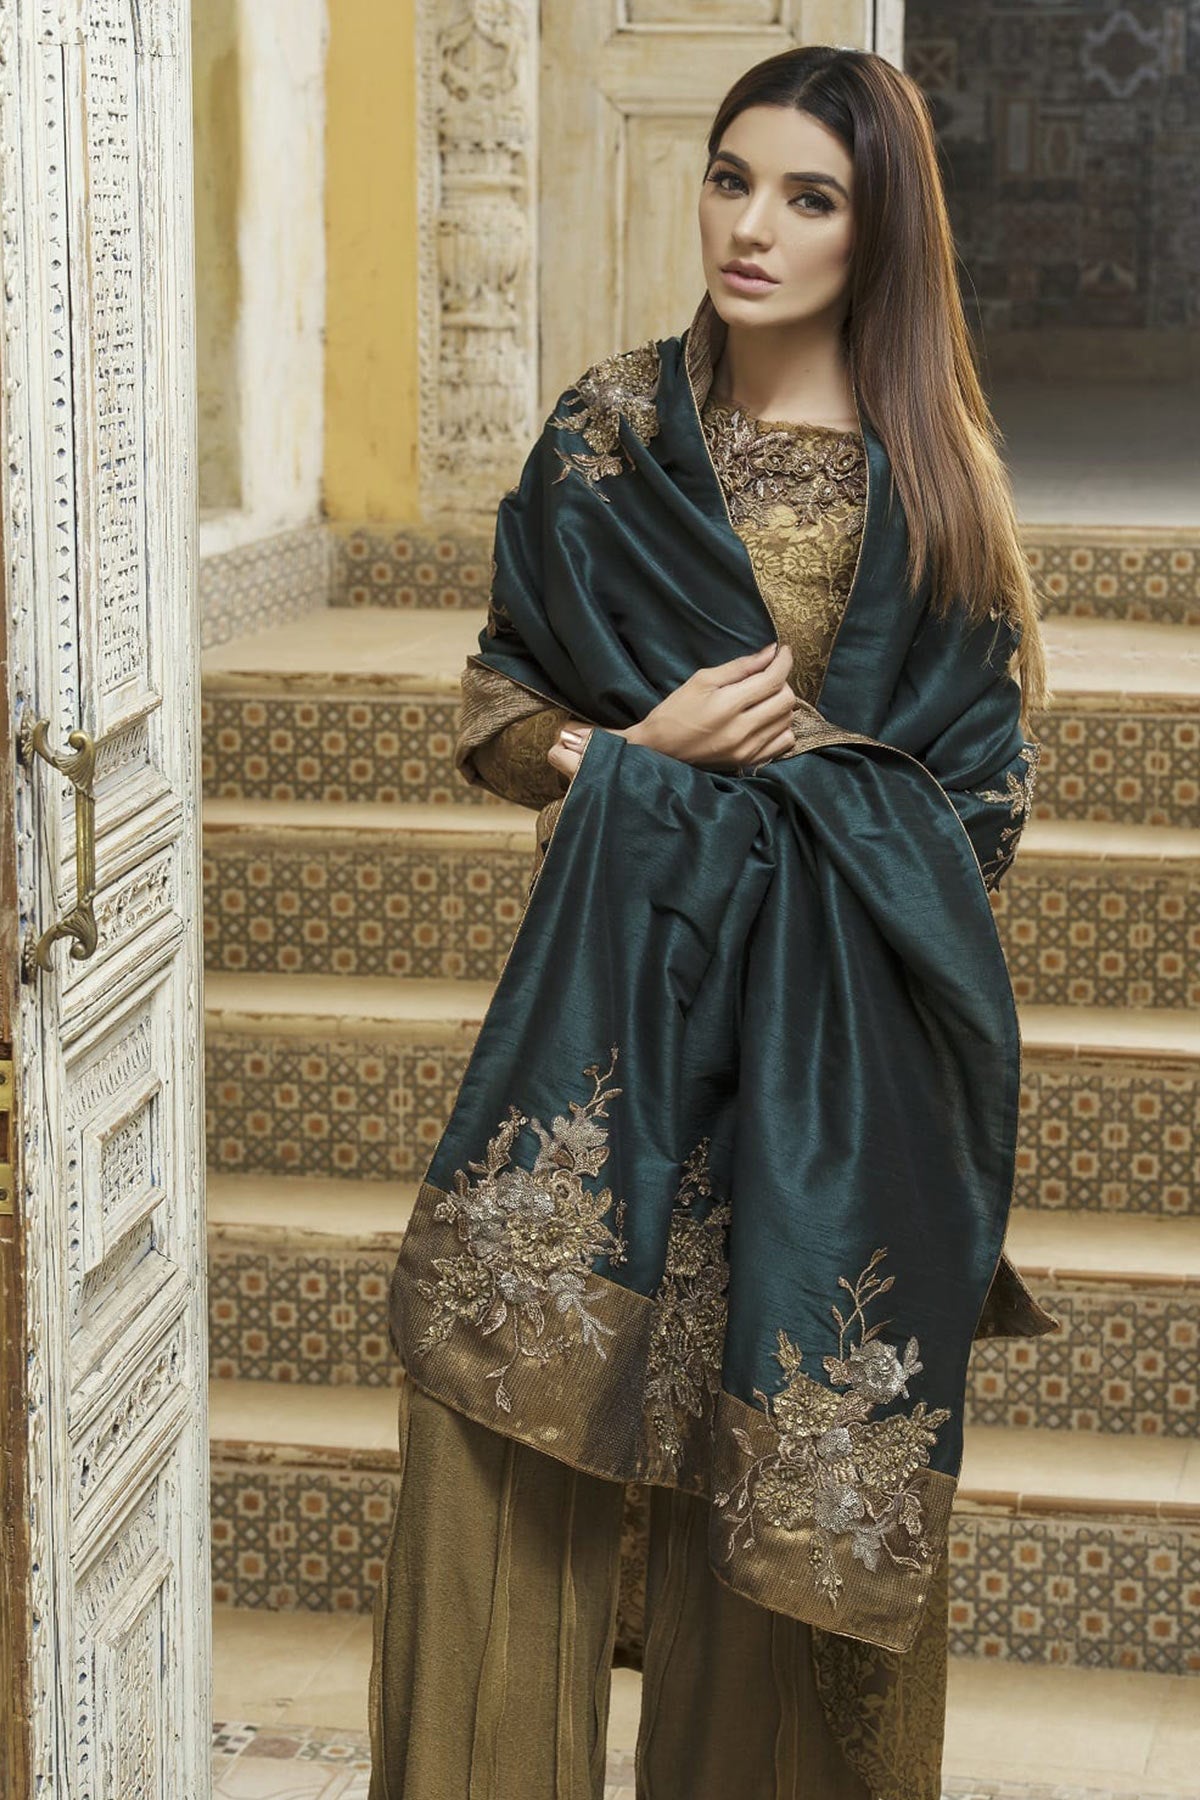 Empress Bouquet ( Shirt and trousers) - Nilofer Shahid